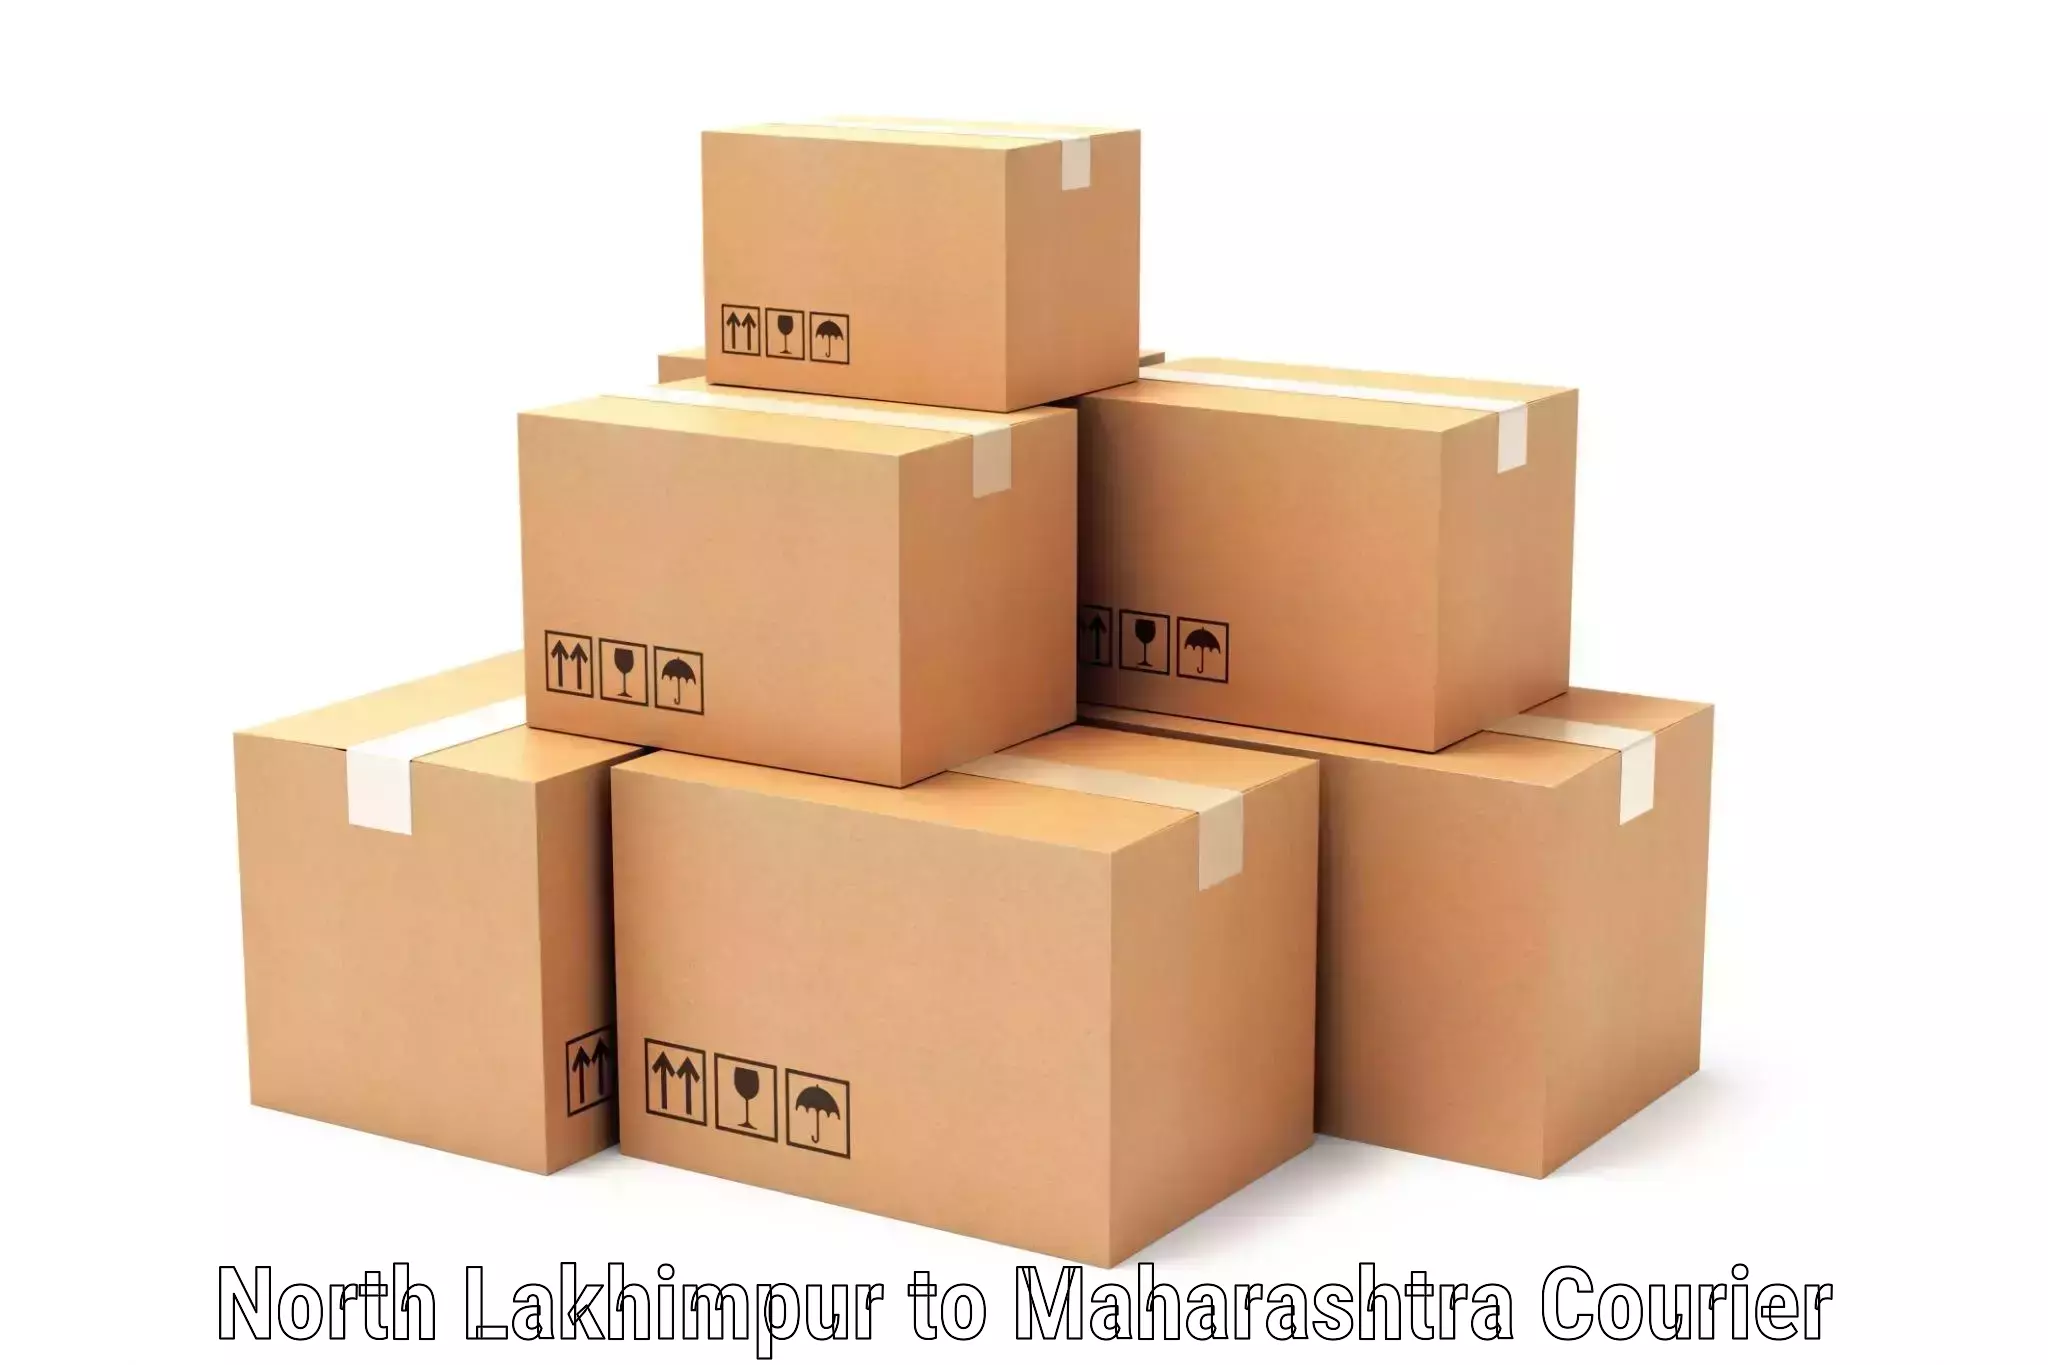 Residential courier service North Lakhimpur to Shrivardhan